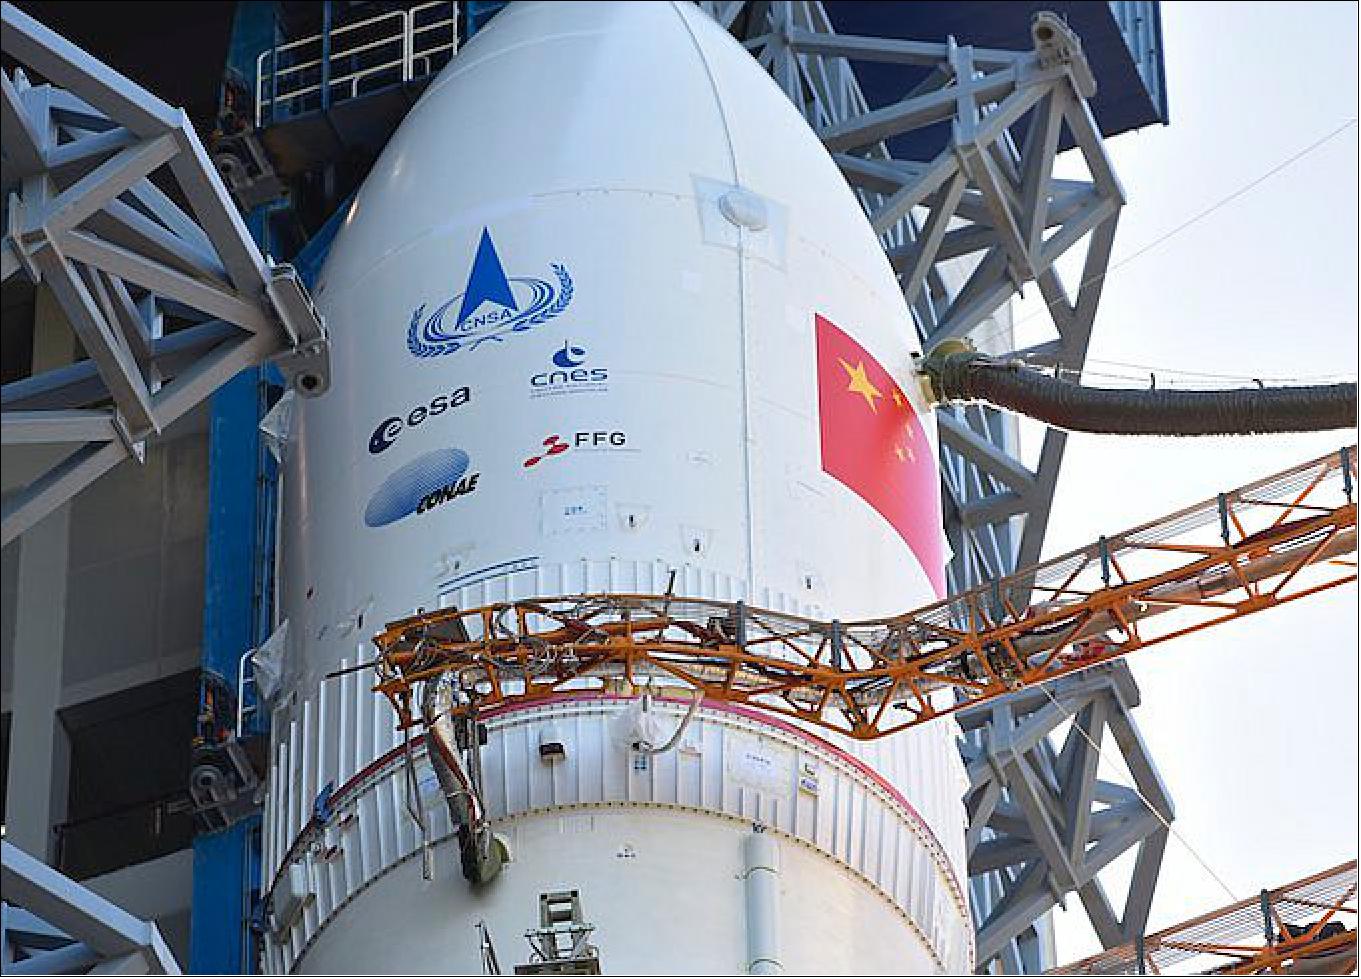 Figure 5: Logos for ESA (European Space Agency), the French space agency CNES, Argentina’s space agency CONAE, and the Austrian Research Promotion Agency (FFG) are installed on the Long March 5’s payload fairing (image credit: China National Space Administration)